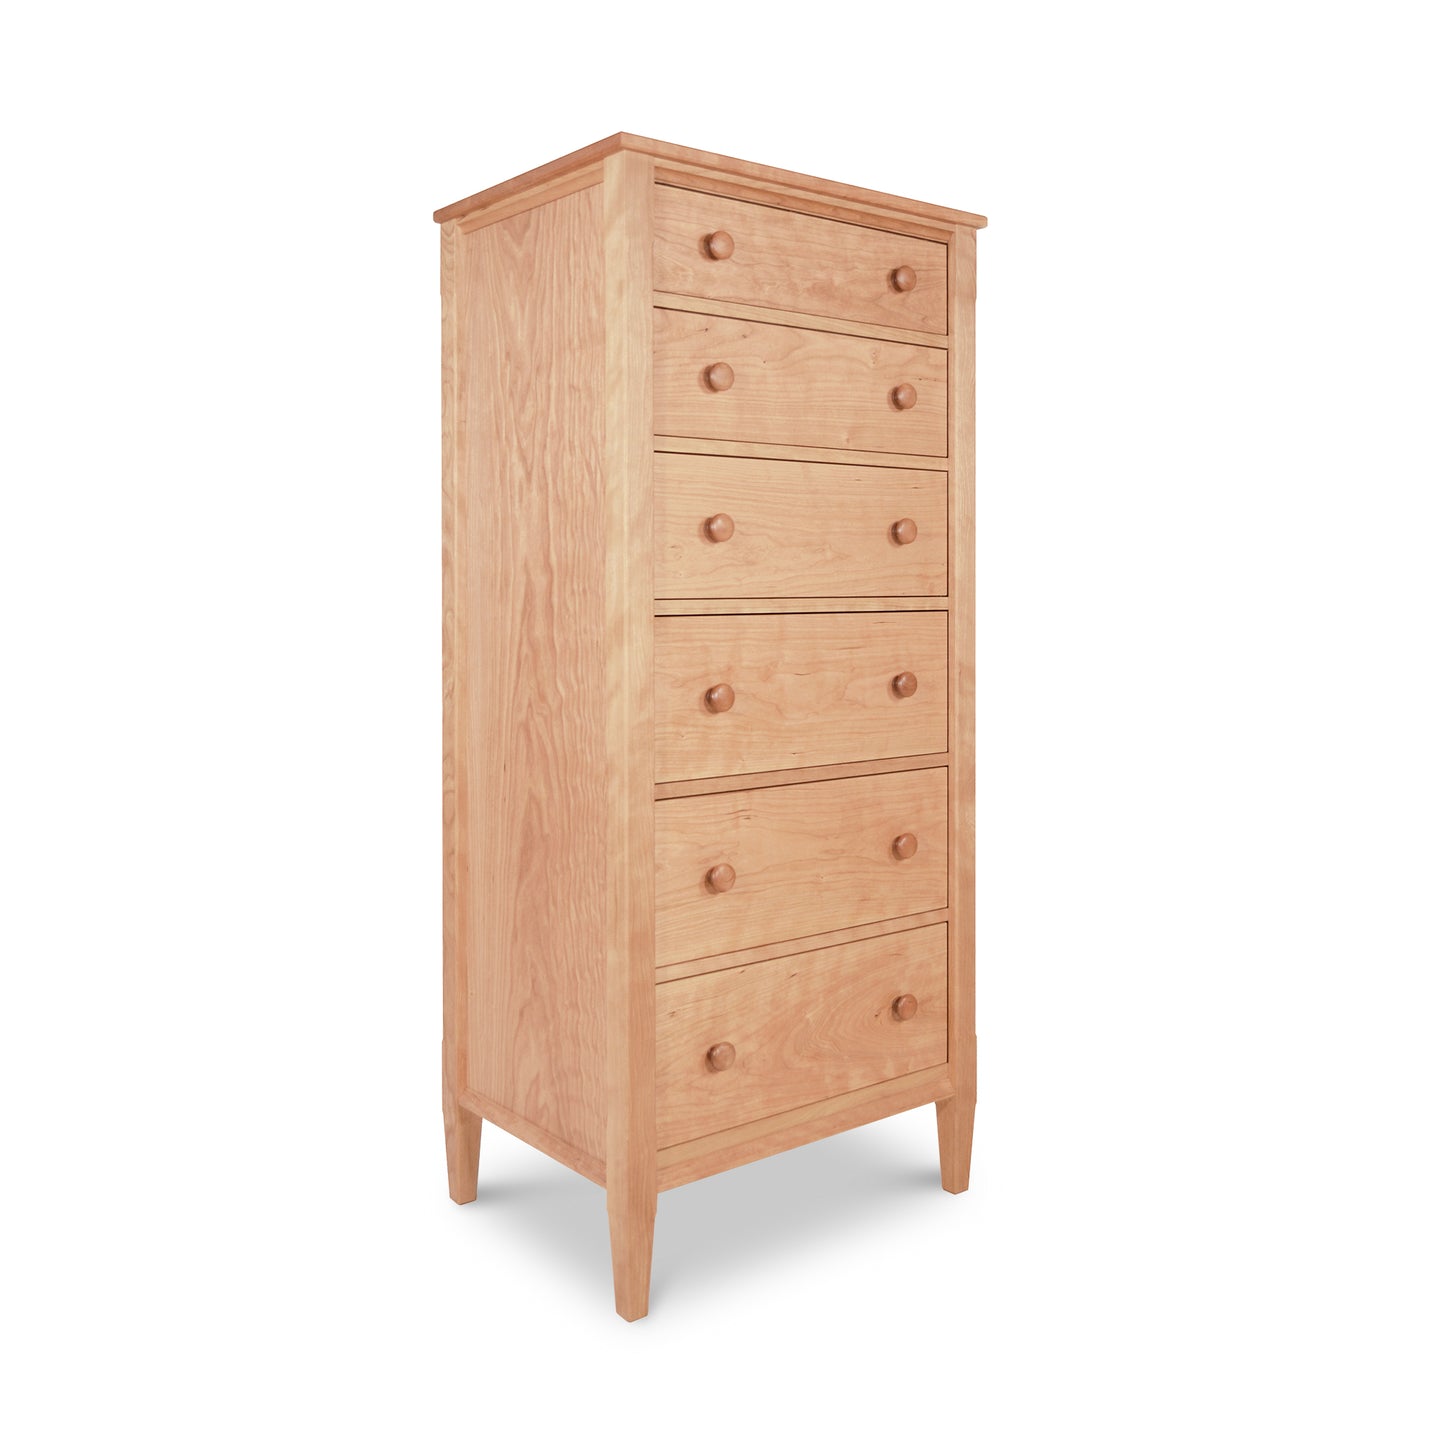 A tall Vermont Shaker Lingerie Chest from the Maple Corner Woodworks Collection, with five drawers and rounded knobs, standing on four slender legs, isolated on a white background.